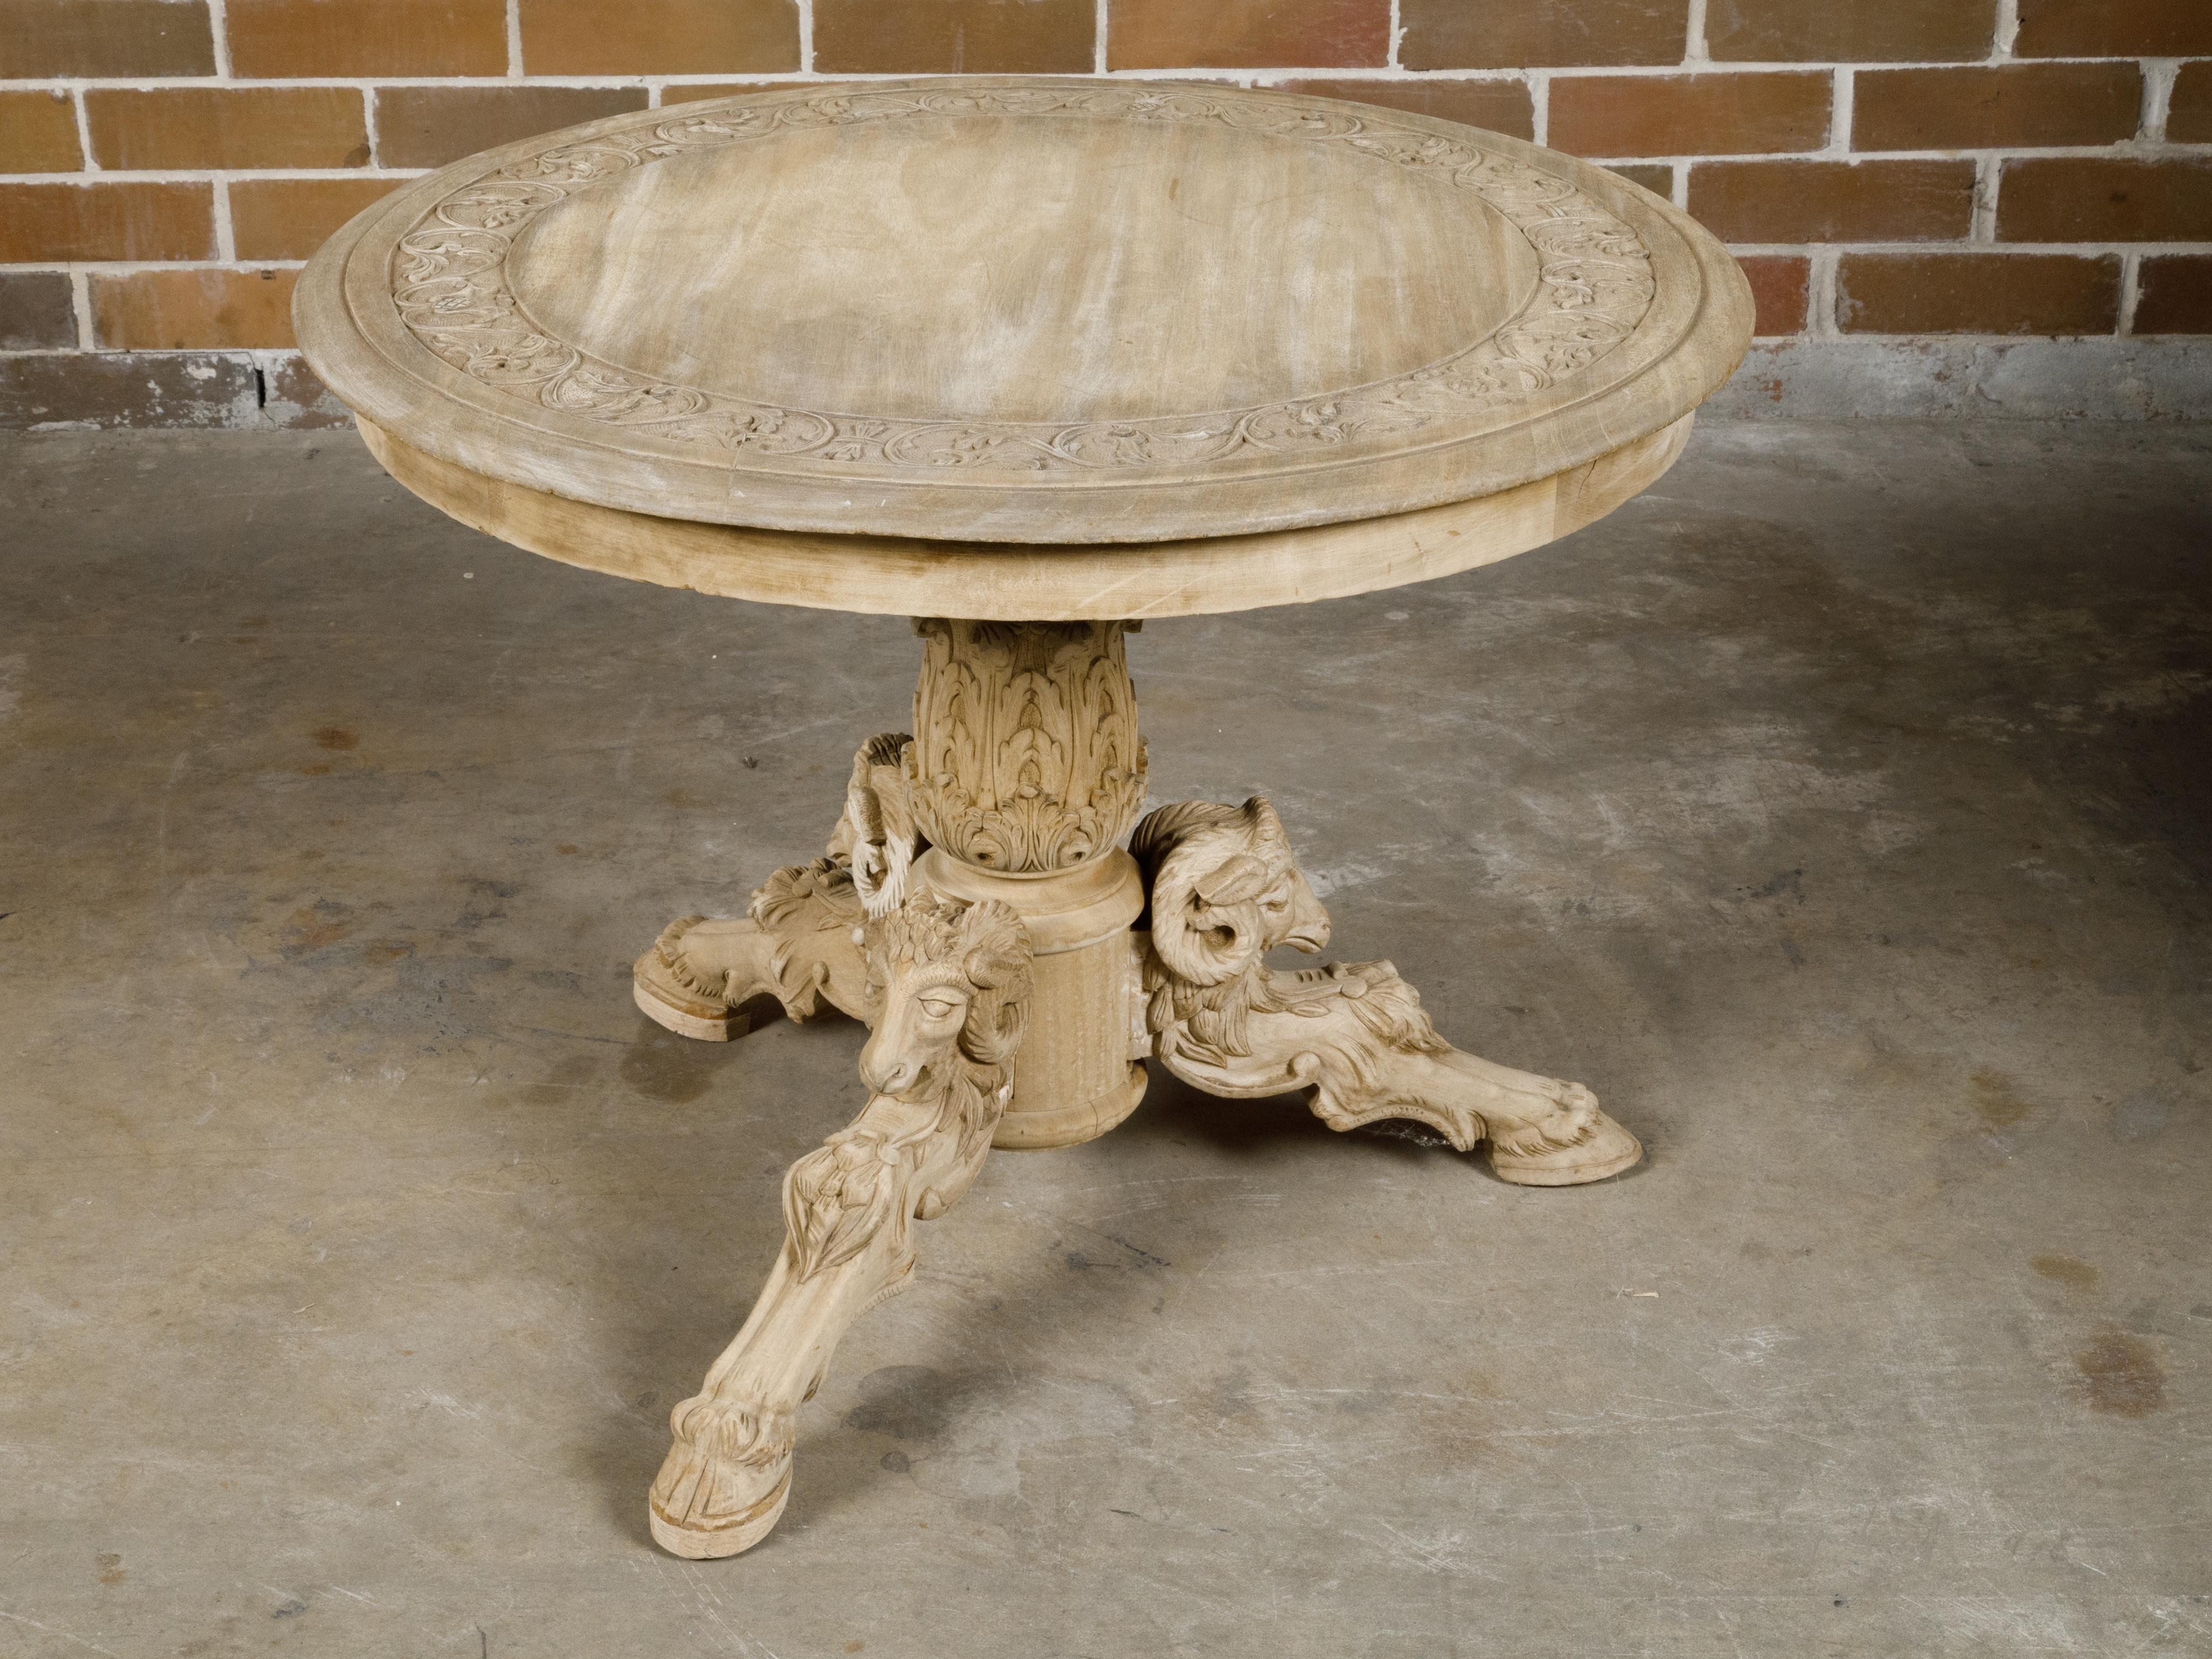 French 1900s Round Top Pedestal Table with Carved Rams' Heads and Scrollwork For Sale 10